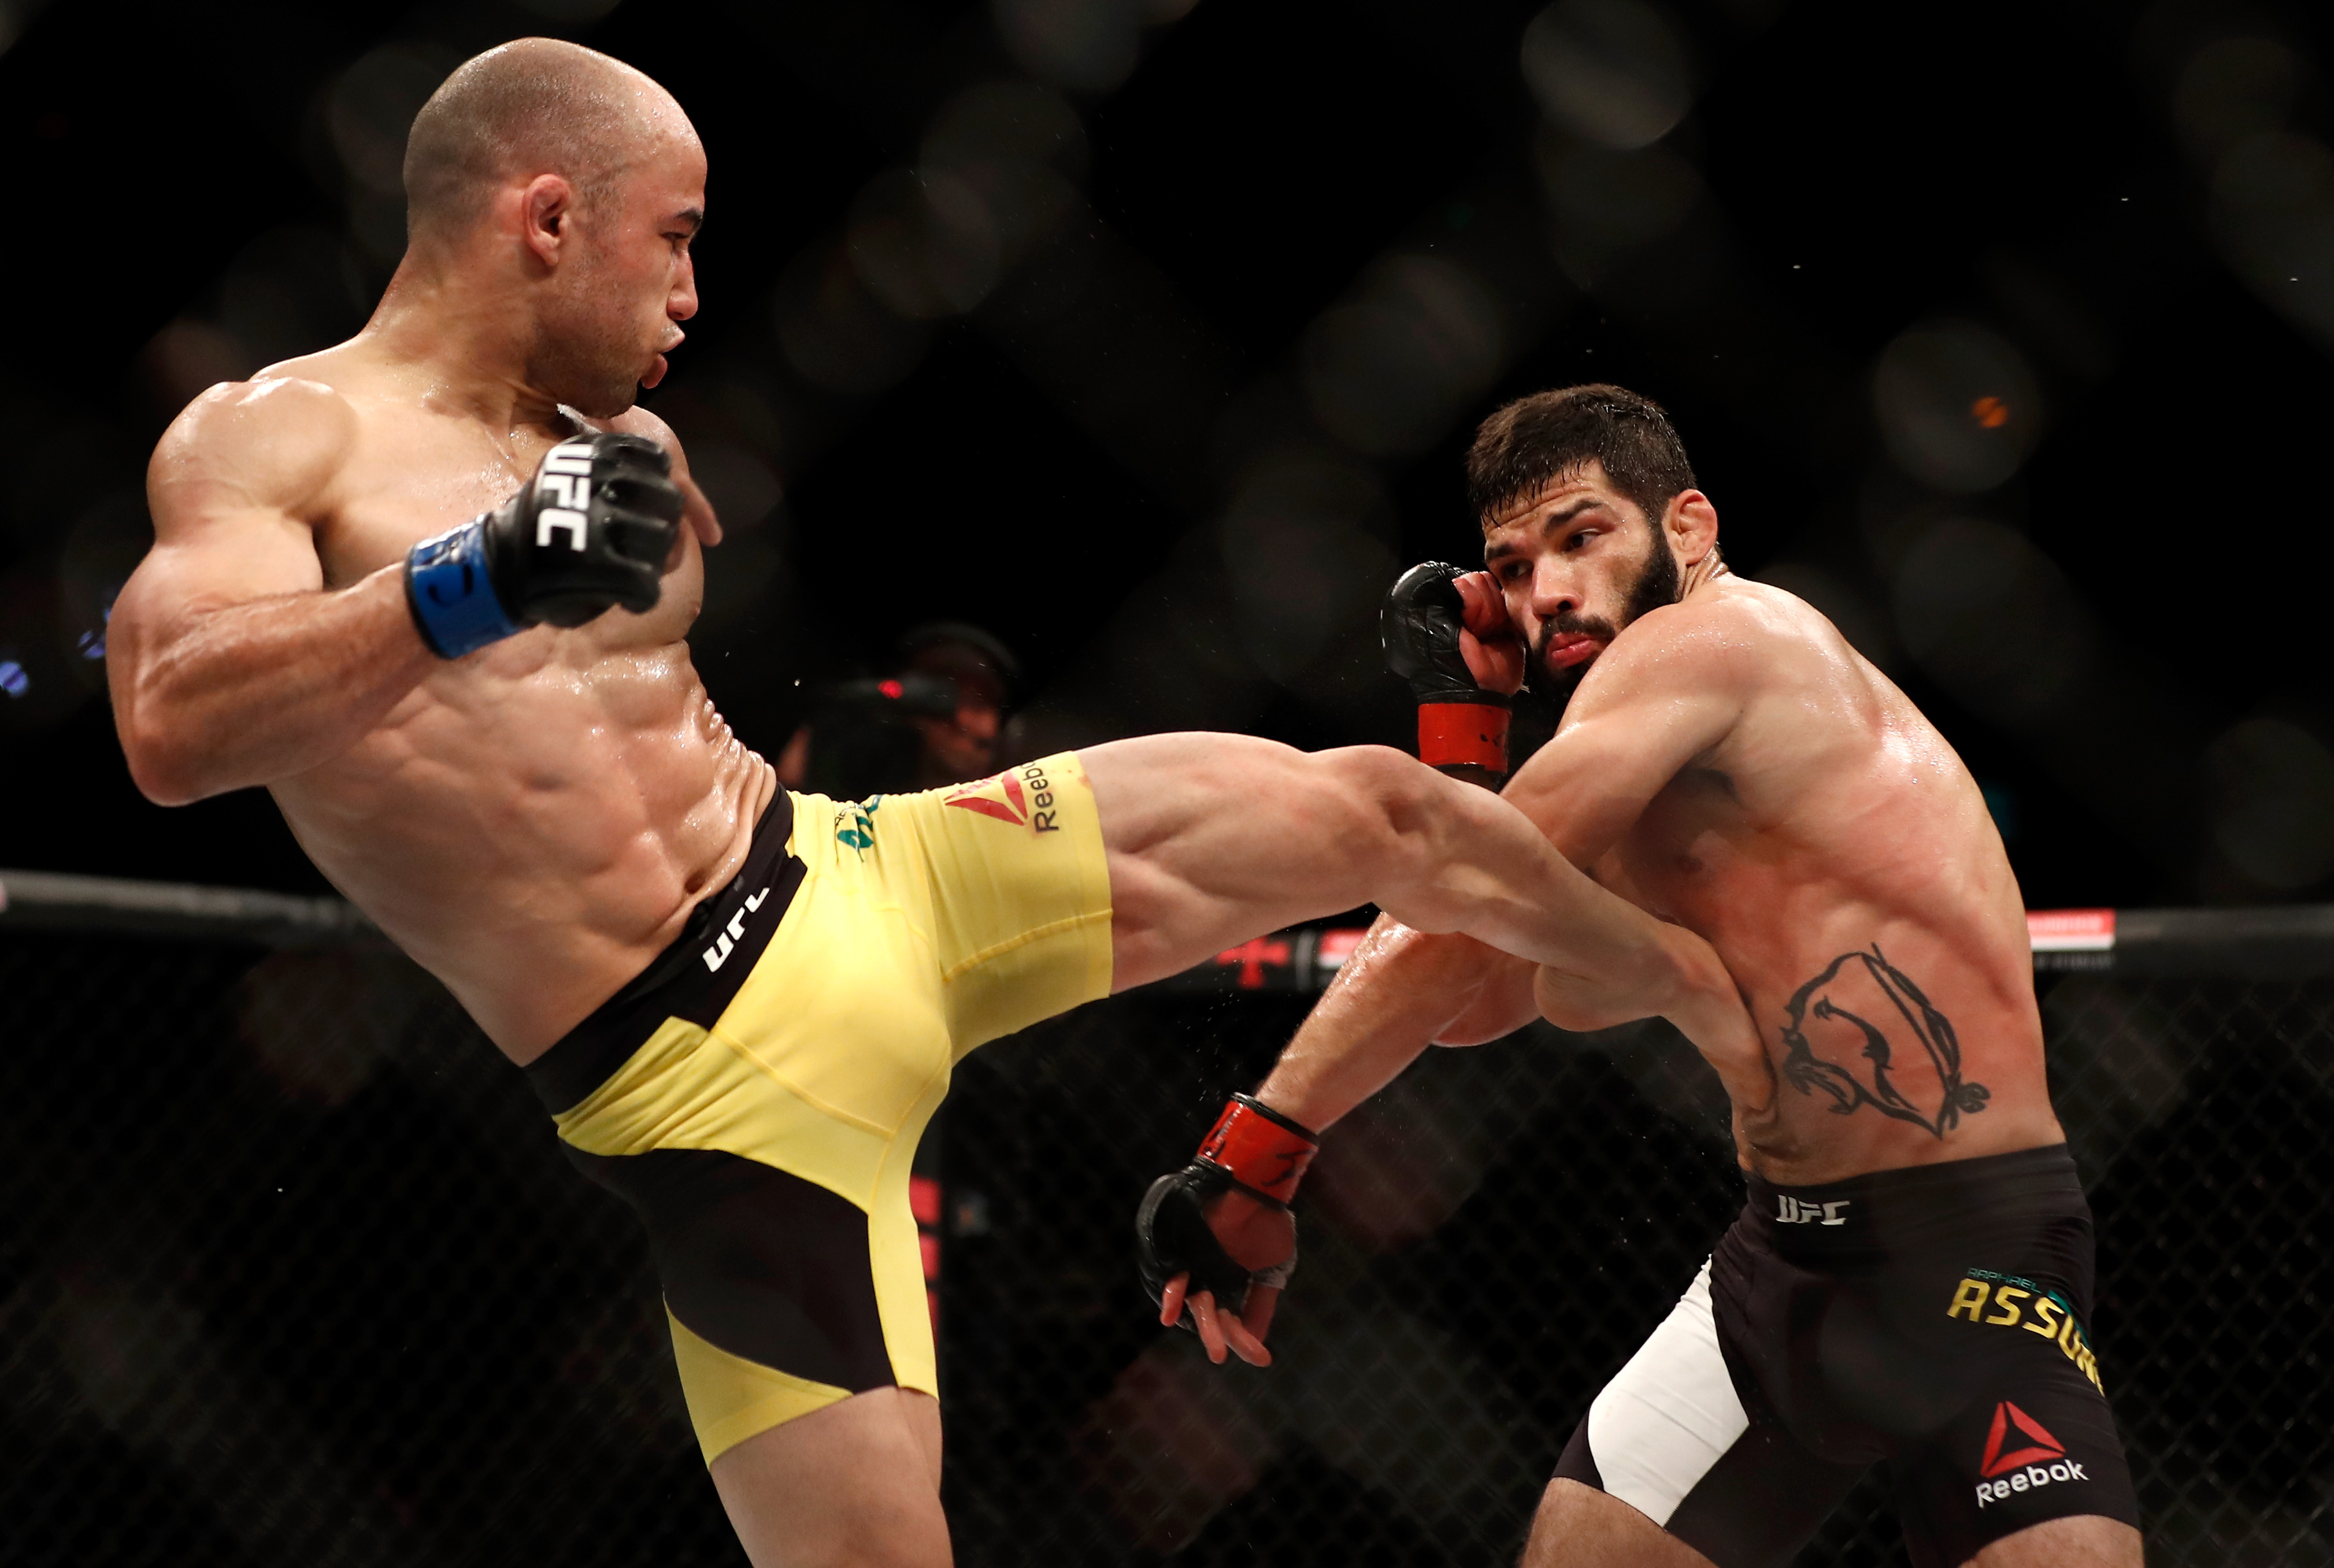 6 Easy Facts About Ultimate Fighting Championship (UFC) Explained